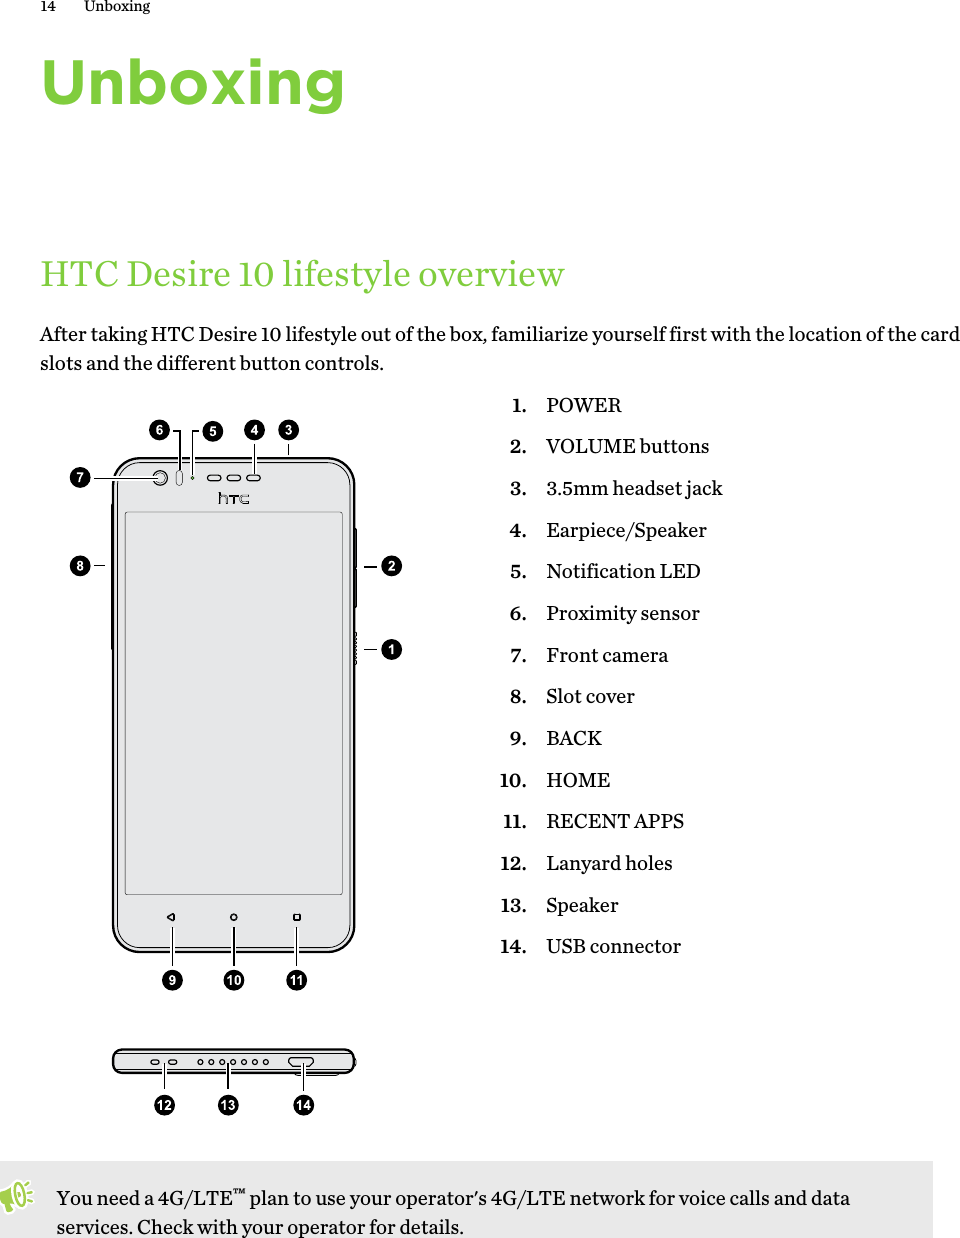 UnboxingHTC Desire 10 lifestyle overviewAfter taking HTC Desire 10 lifestyle out of the box, familiarize yourself first with the location of the card slots and the different button controls. 1. POWER2. VOLUME buttons3. 3.5mm headset jack4. Earpiece/Speaker5. Notification LED6. Proximity sensor7. Front camera8. Slot cover9. BACK10. HOME11. RECENT APPS12. Lanyard holes13. Speaker14. USB connectorYou need a 4G/LTE™ plan to use your operator&apos;s 4G/LTE network for voice calls and data services. Check with your operator for details.14 Unboxing